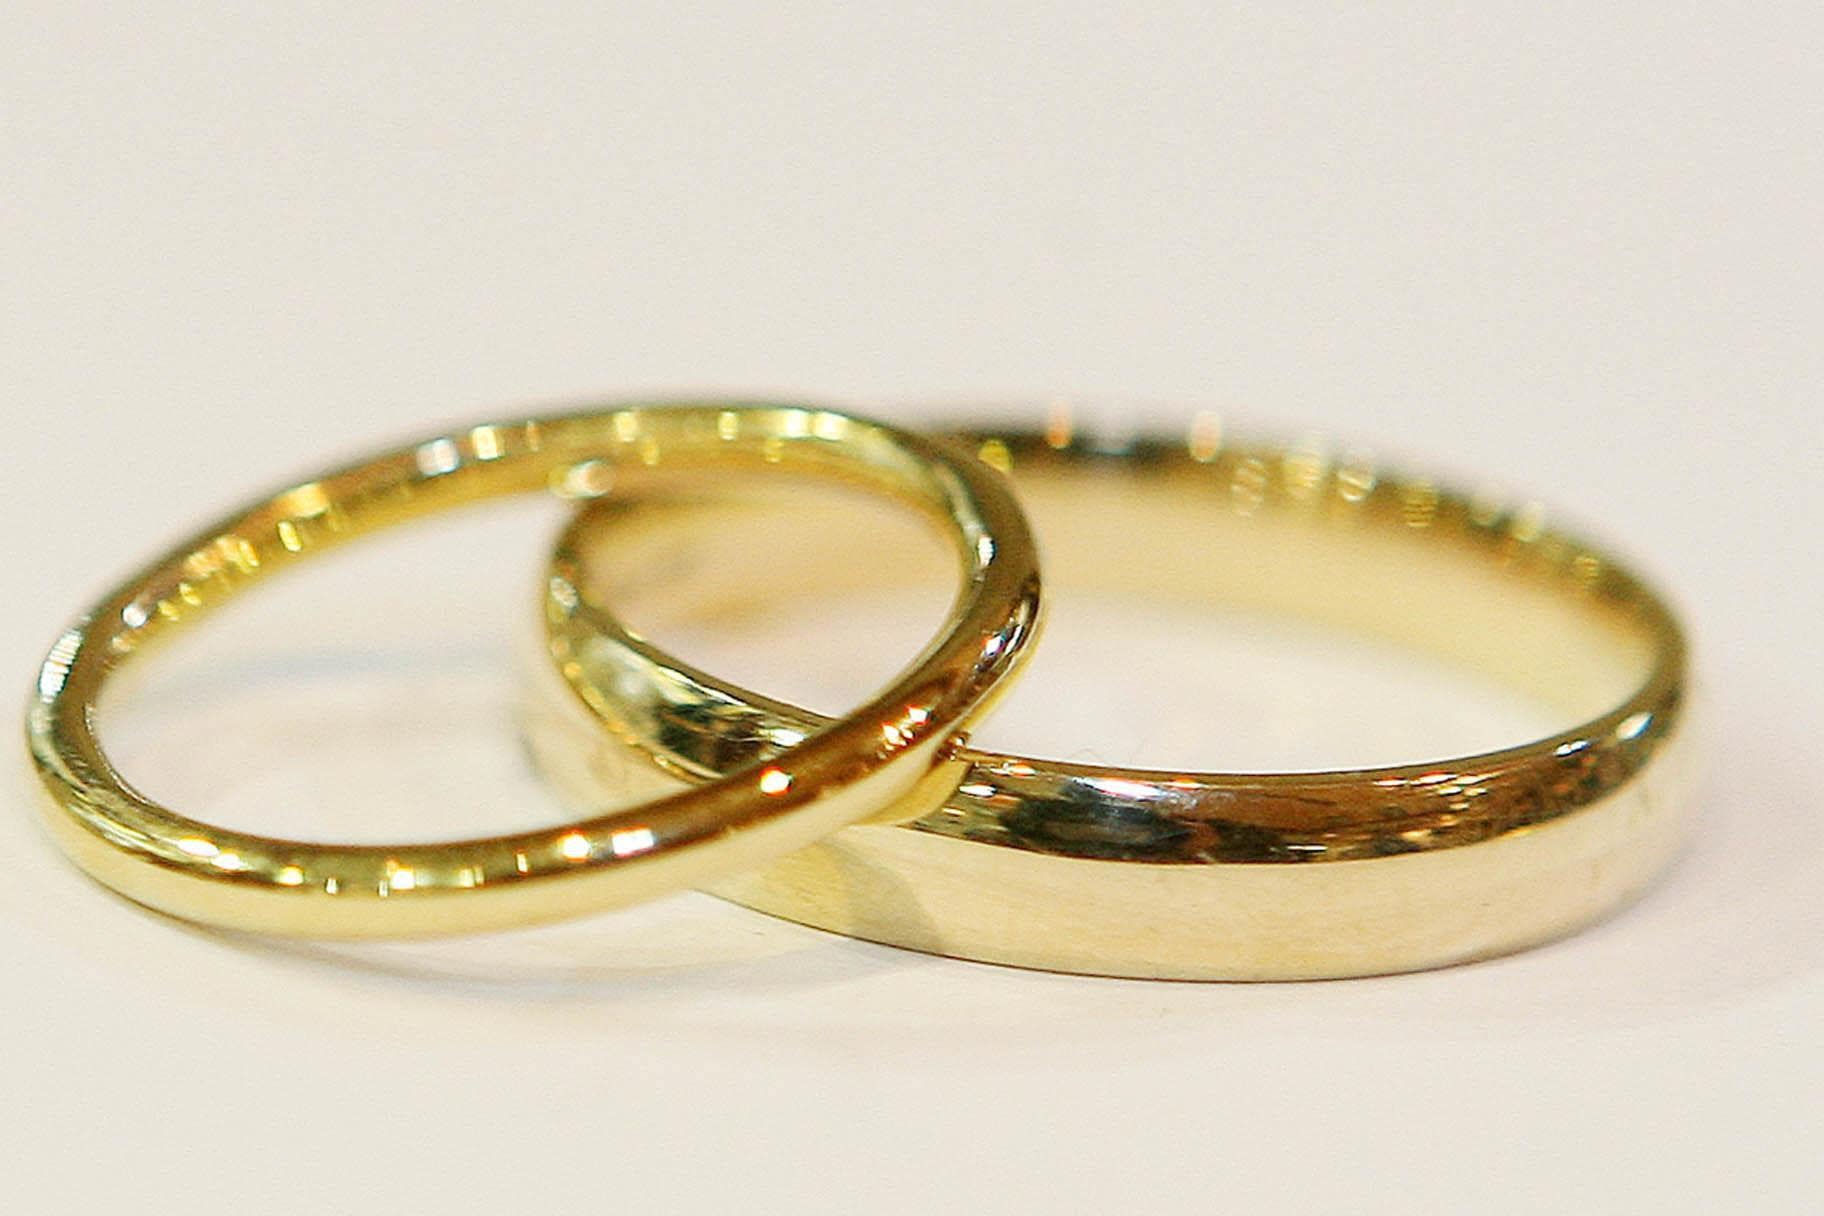 Legislation that comes into force on Monday means 16 and 17-year-olds can no longer get married or have a civil partnership even if their parents give consent